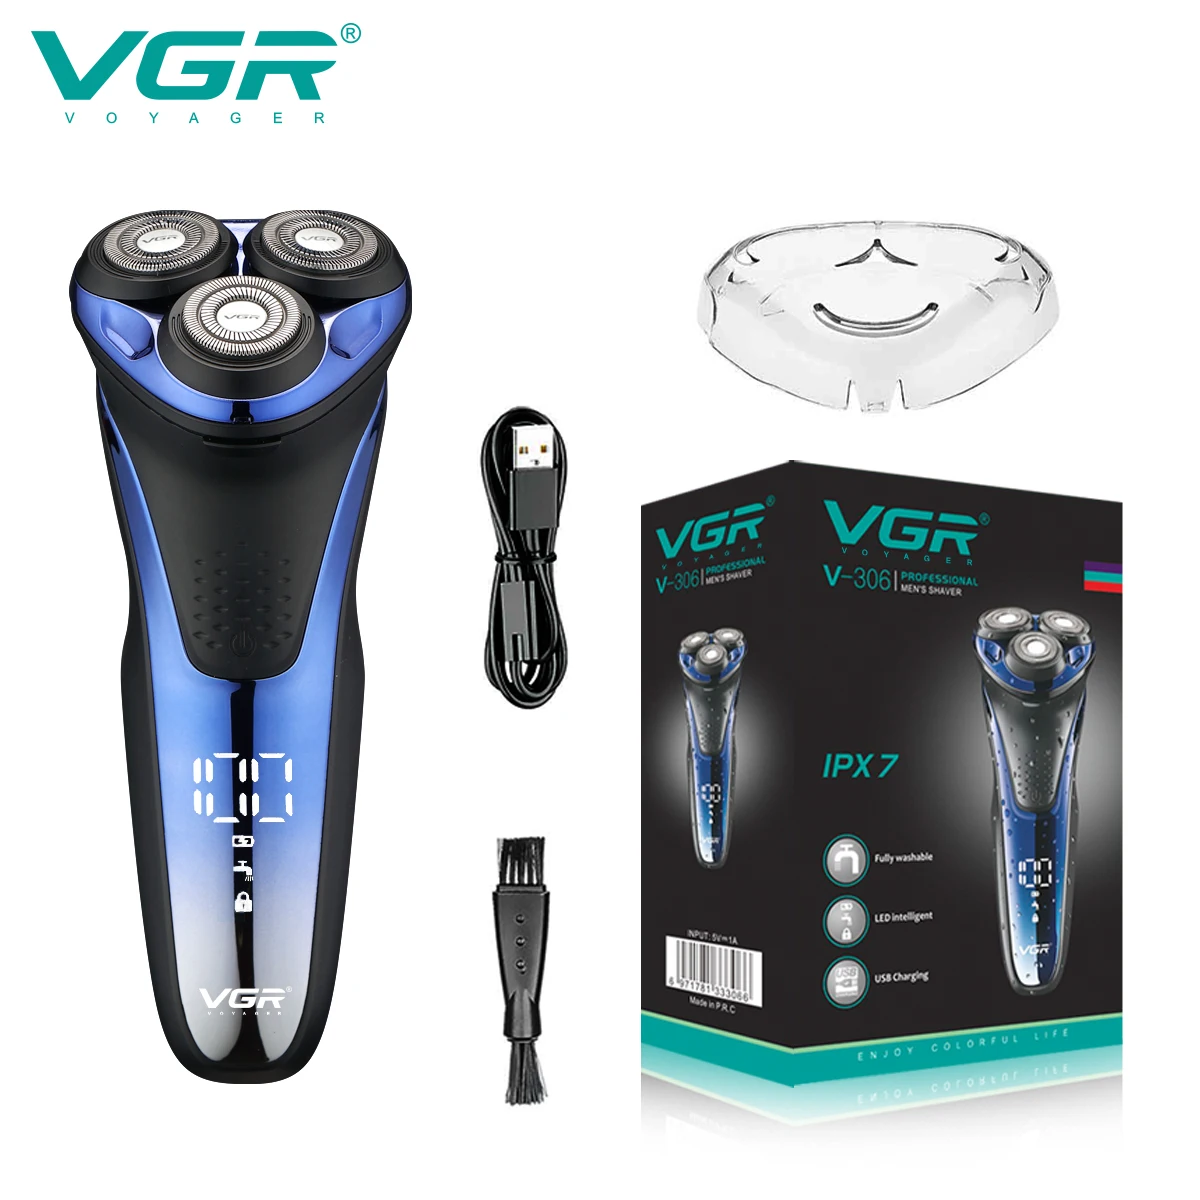 

VGR Hair Trimmer Waterproof Shaver Rechargeable Beard Shaver Professional Cordless Electric Portable Hair Trimmer for Men V-306